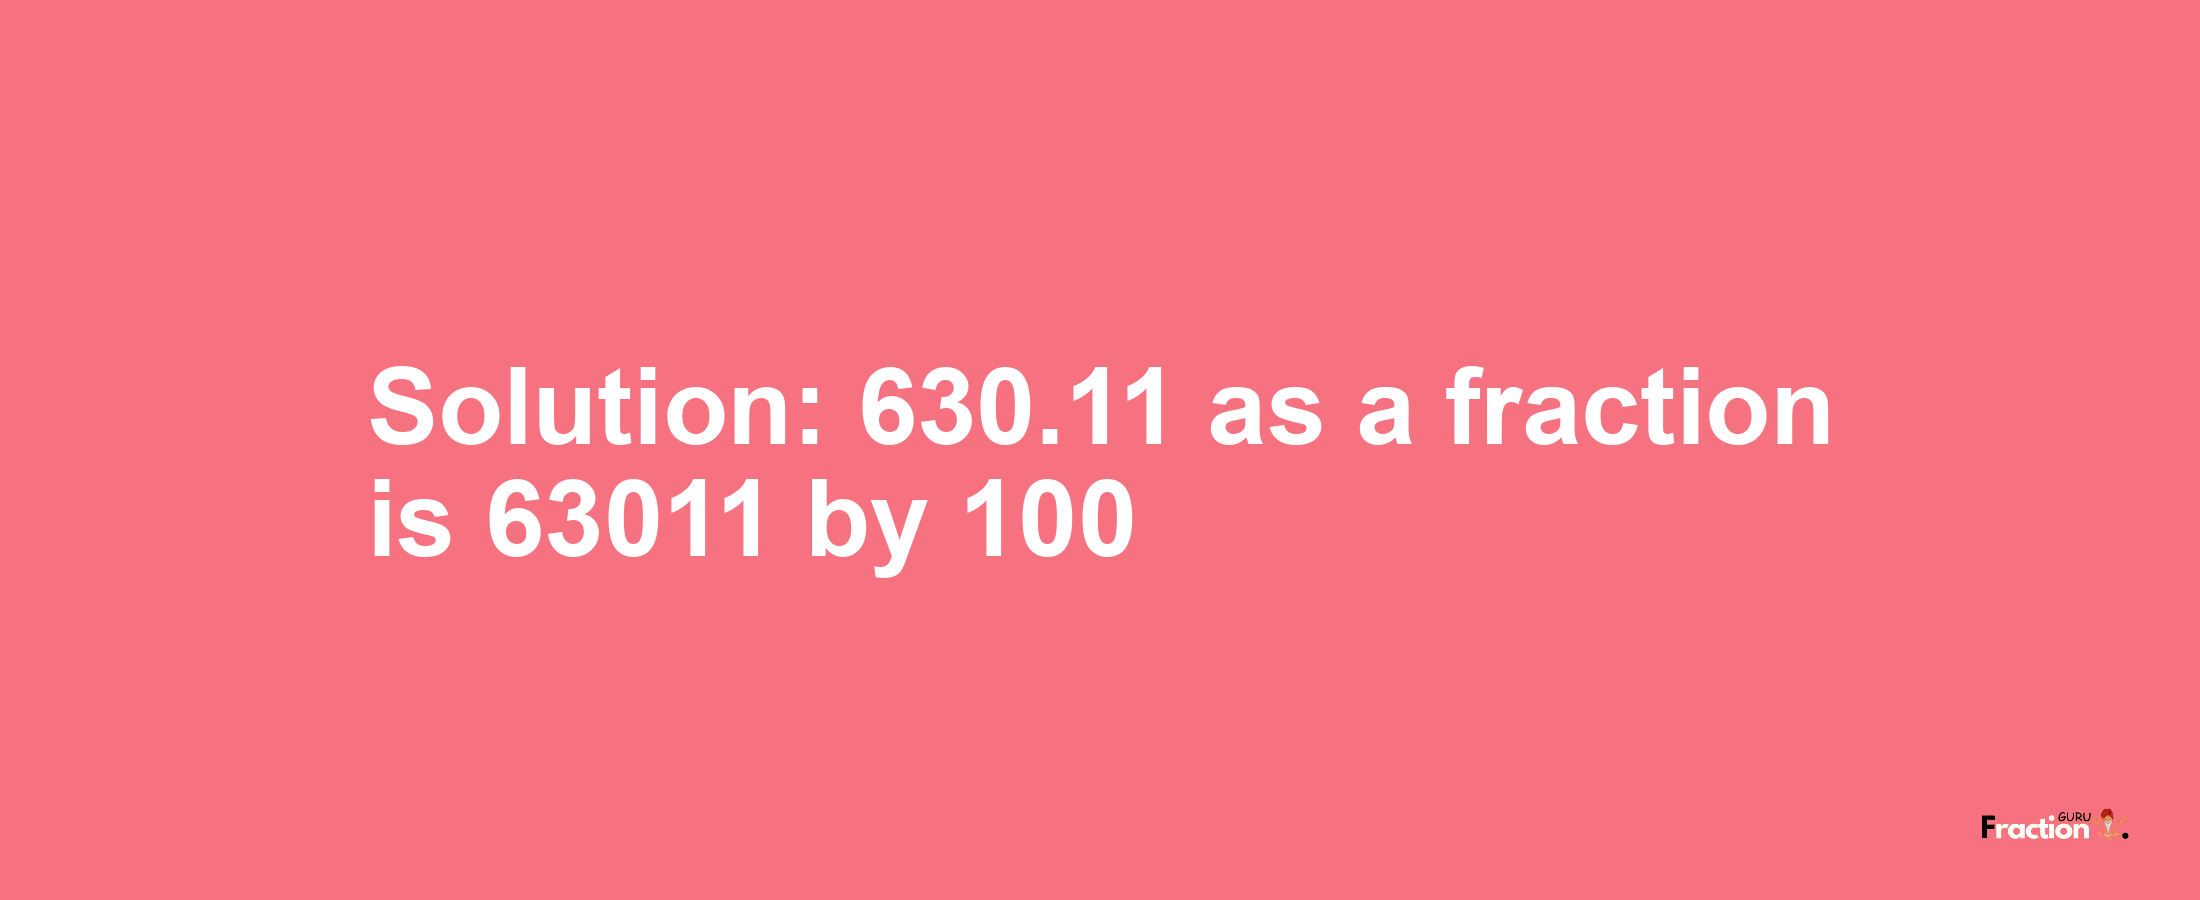 Solution:630.11 as a fraction is 63011/100